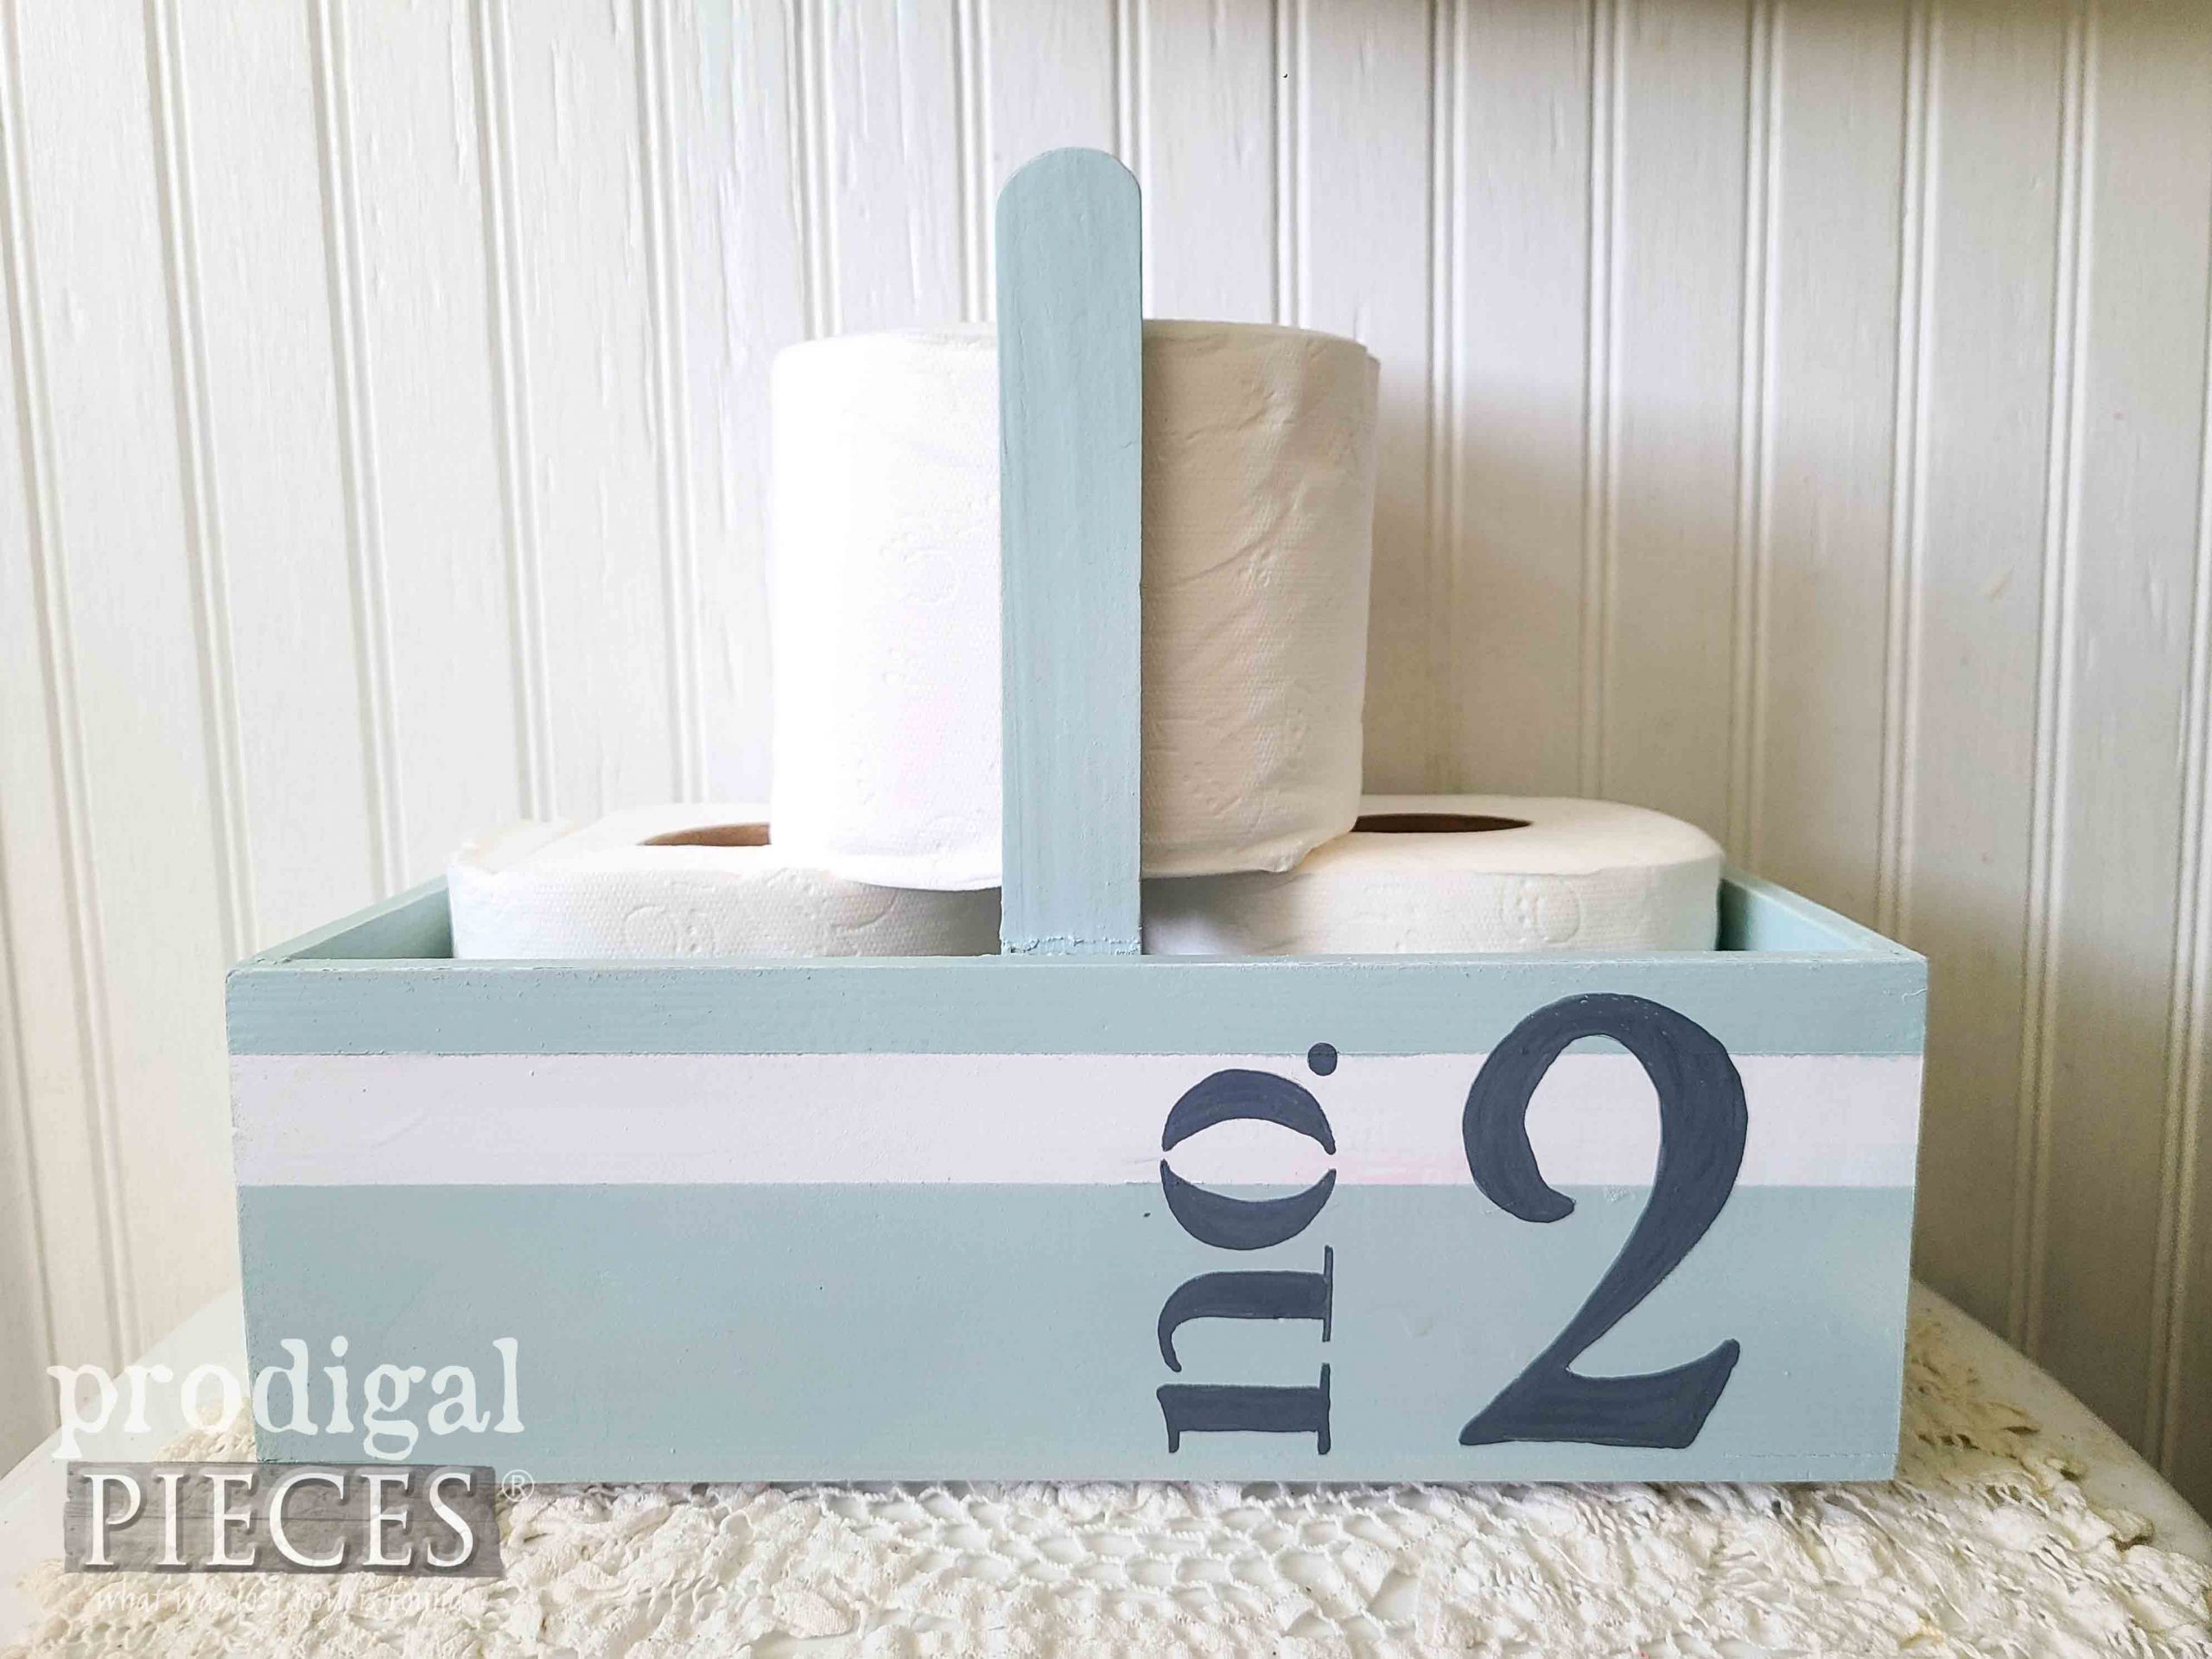 Bathroom No. 2 TP Tote by Larissa of Prodigal Pieces | prodigalpieces.com #prodigalpieces #bathroom #diy